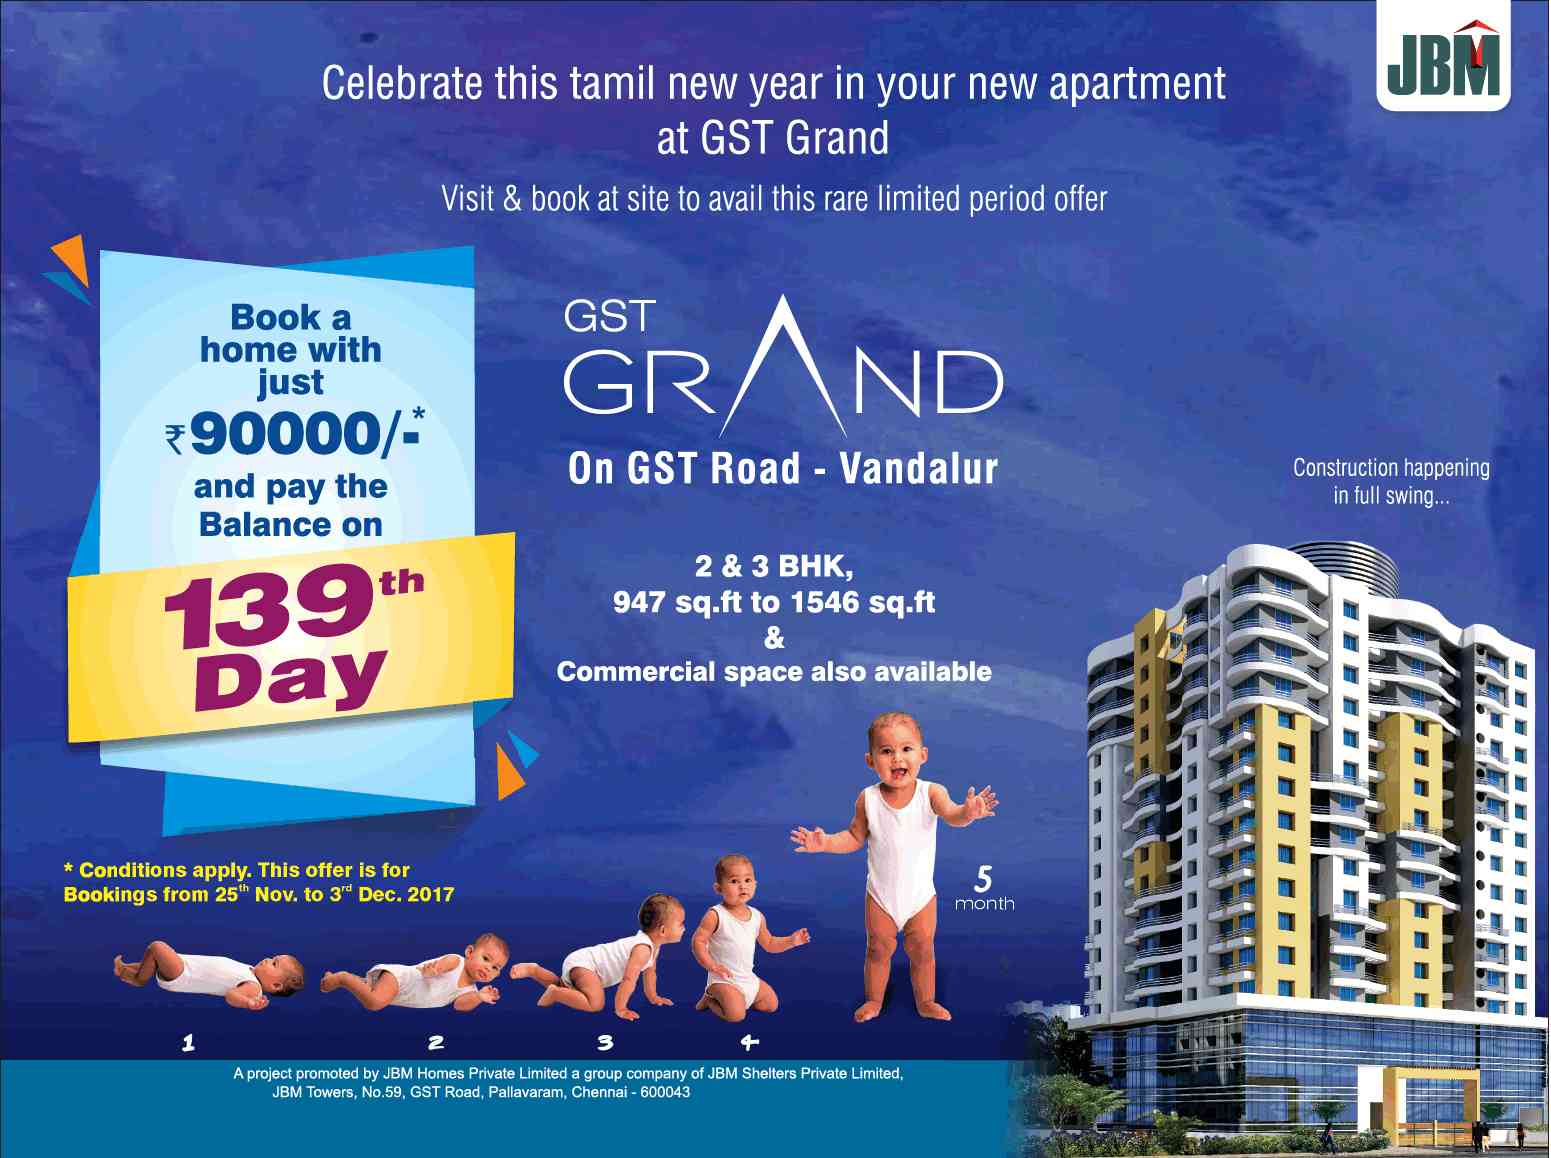 Celebrate this Tamil new year in your new apartment at JBM GST Grand in Chennai Update